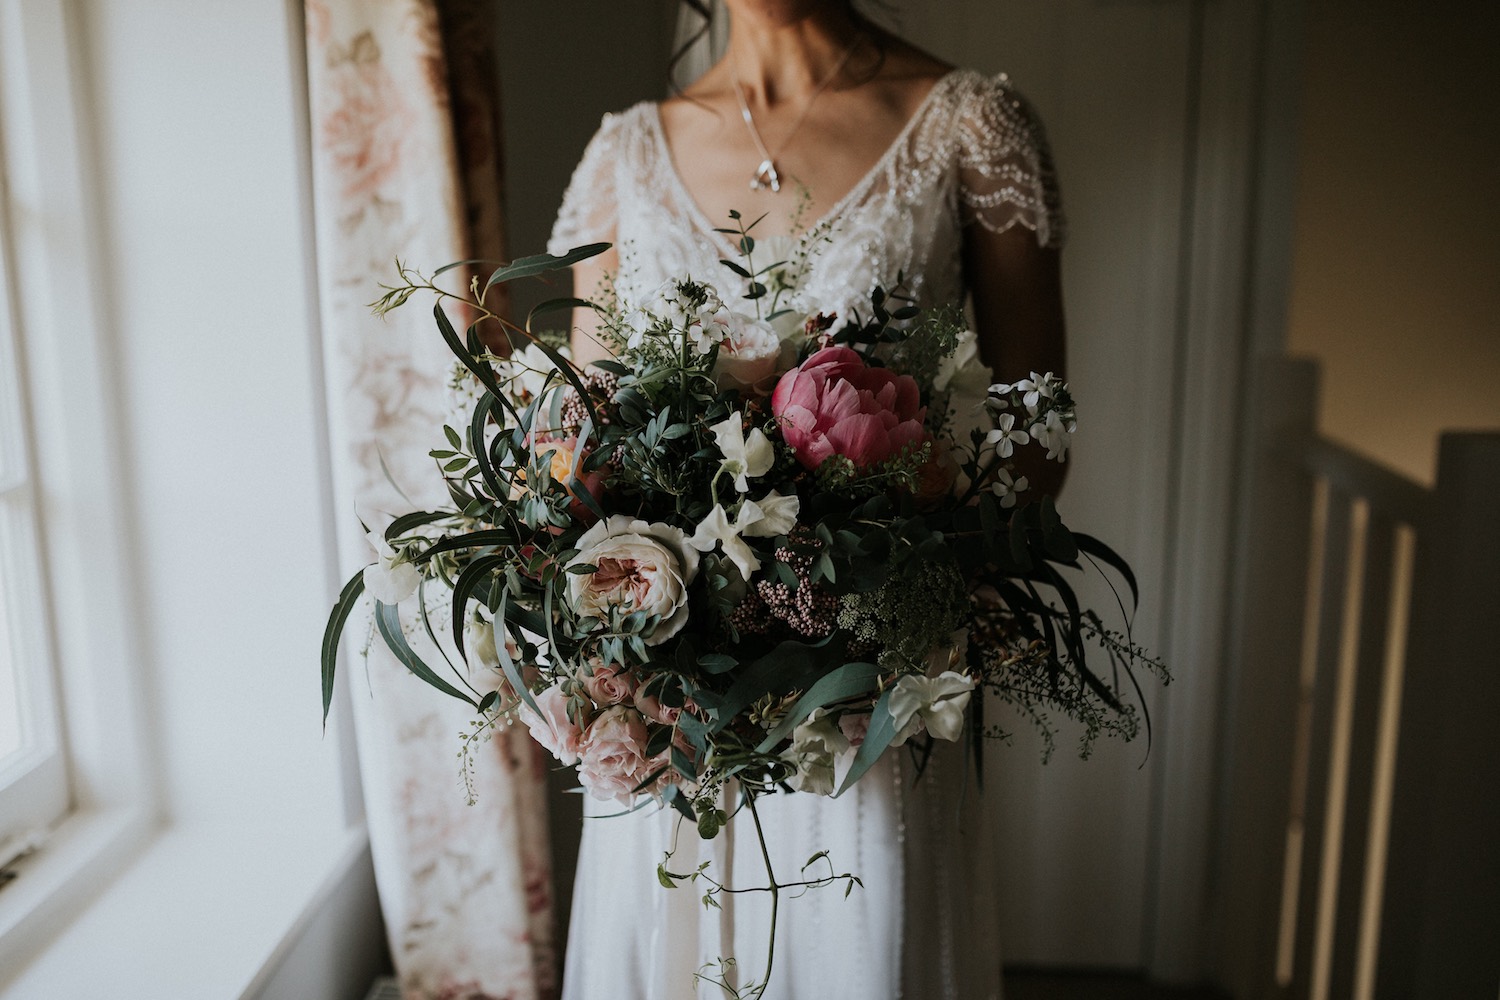 Bride standing by window holding bouquet